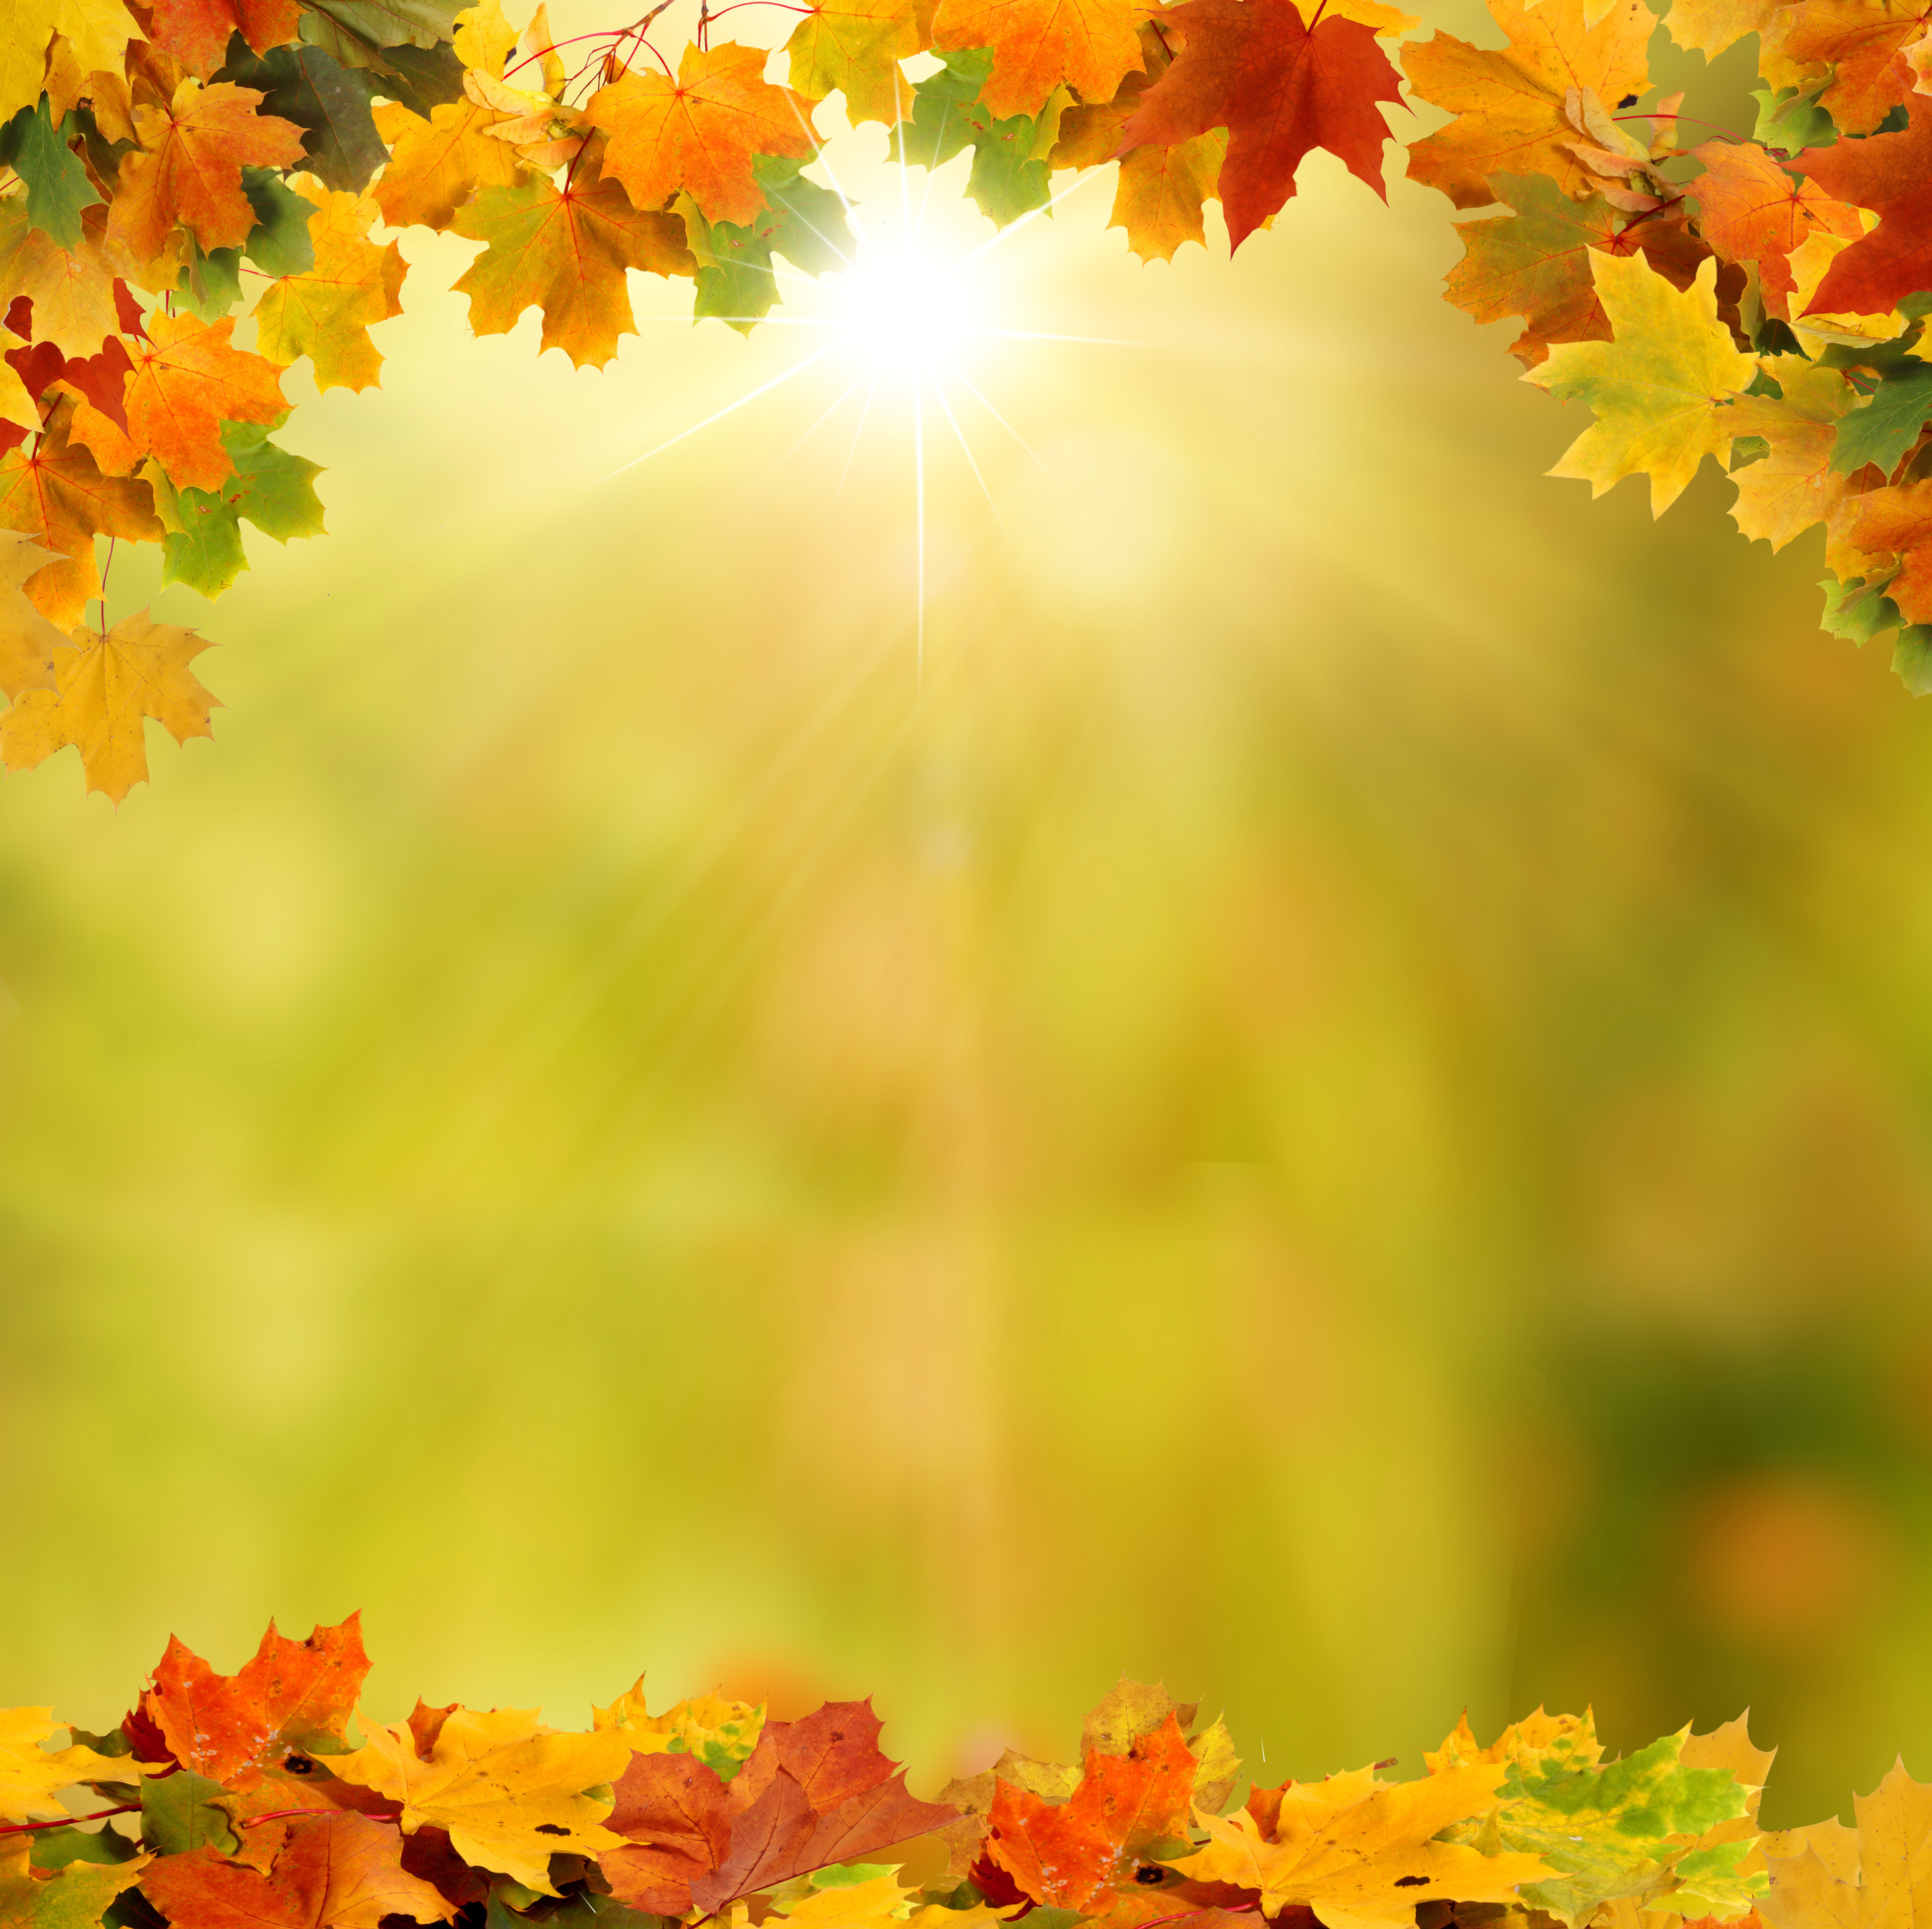 Background with Autumn Leaves | Gallery Yopriceville - High 